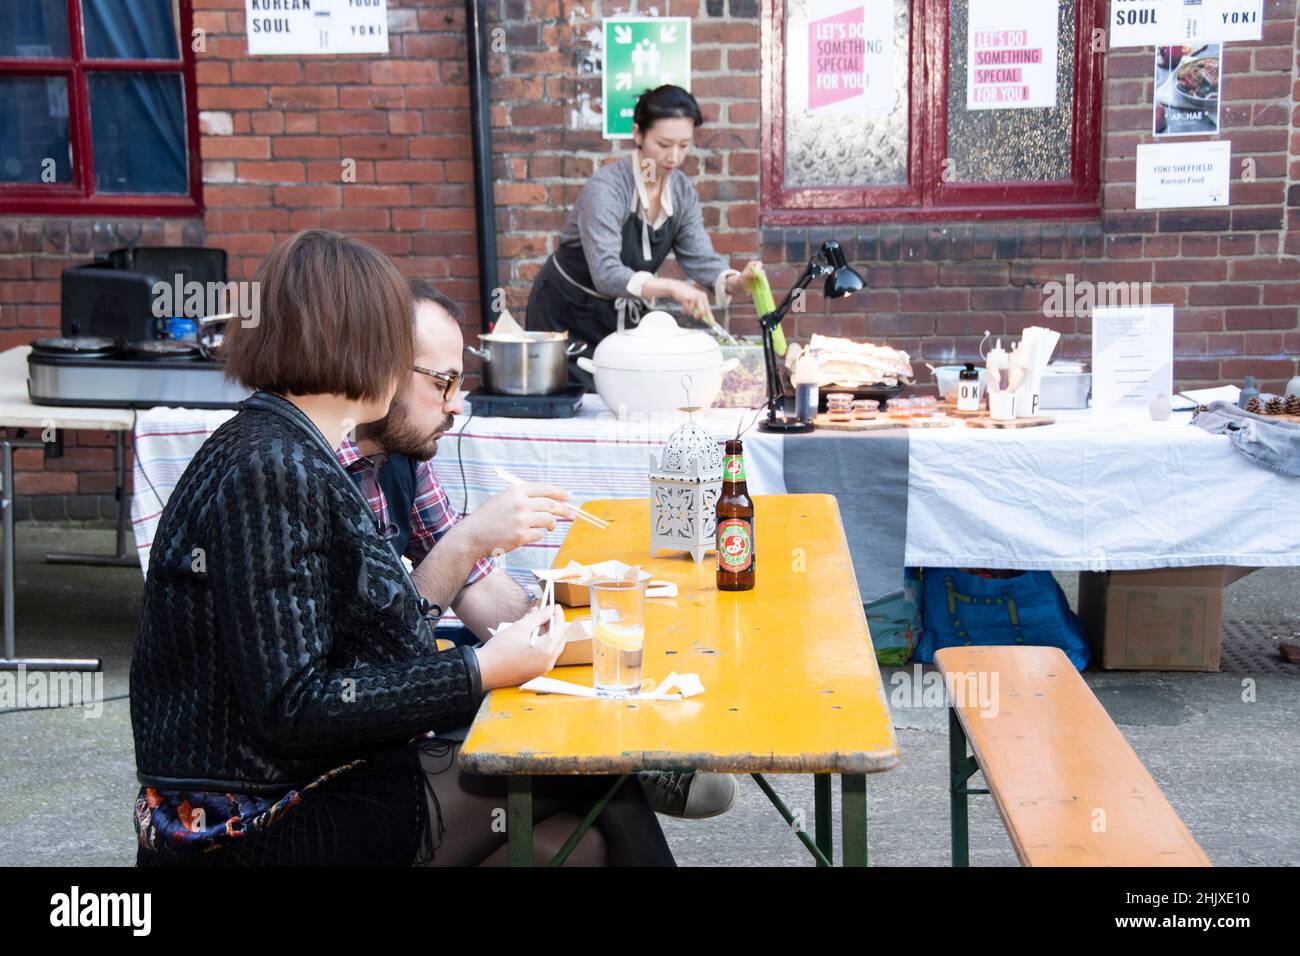 Sheffield,  UK - June 22: Members of the Sheffield Creative Guild eat Korean Soul street food at the 2nd Anniversary party at Yellow Arch Studios Stock Photo